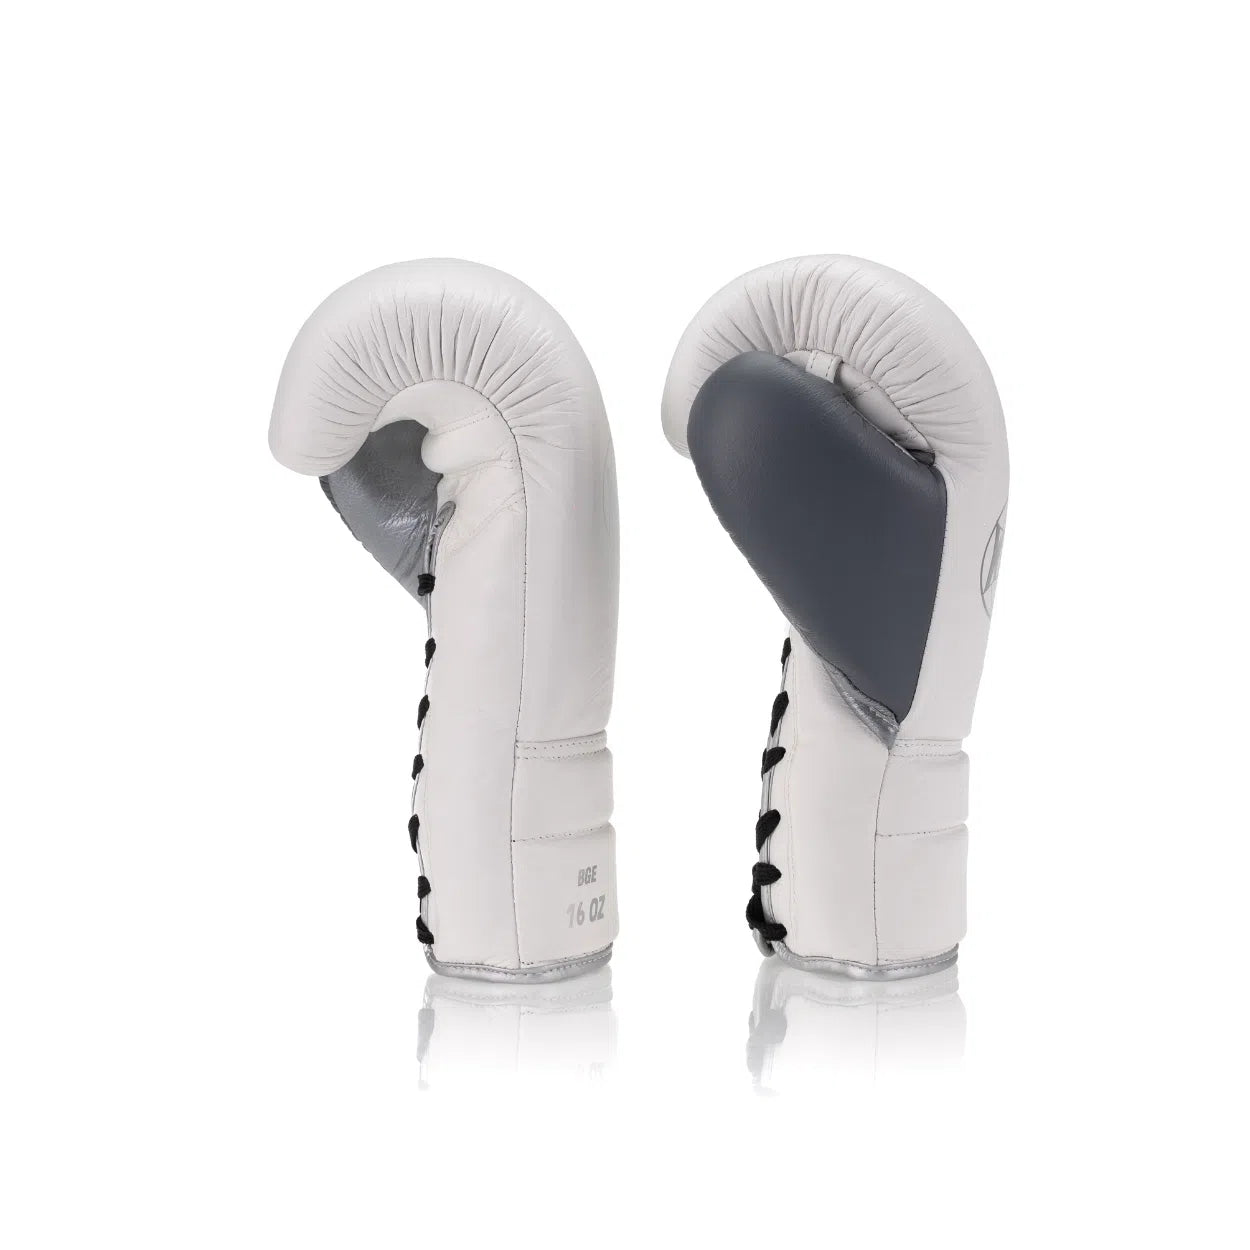 Elite Series Lace-up Boxing Glove - White/Silver/Grey